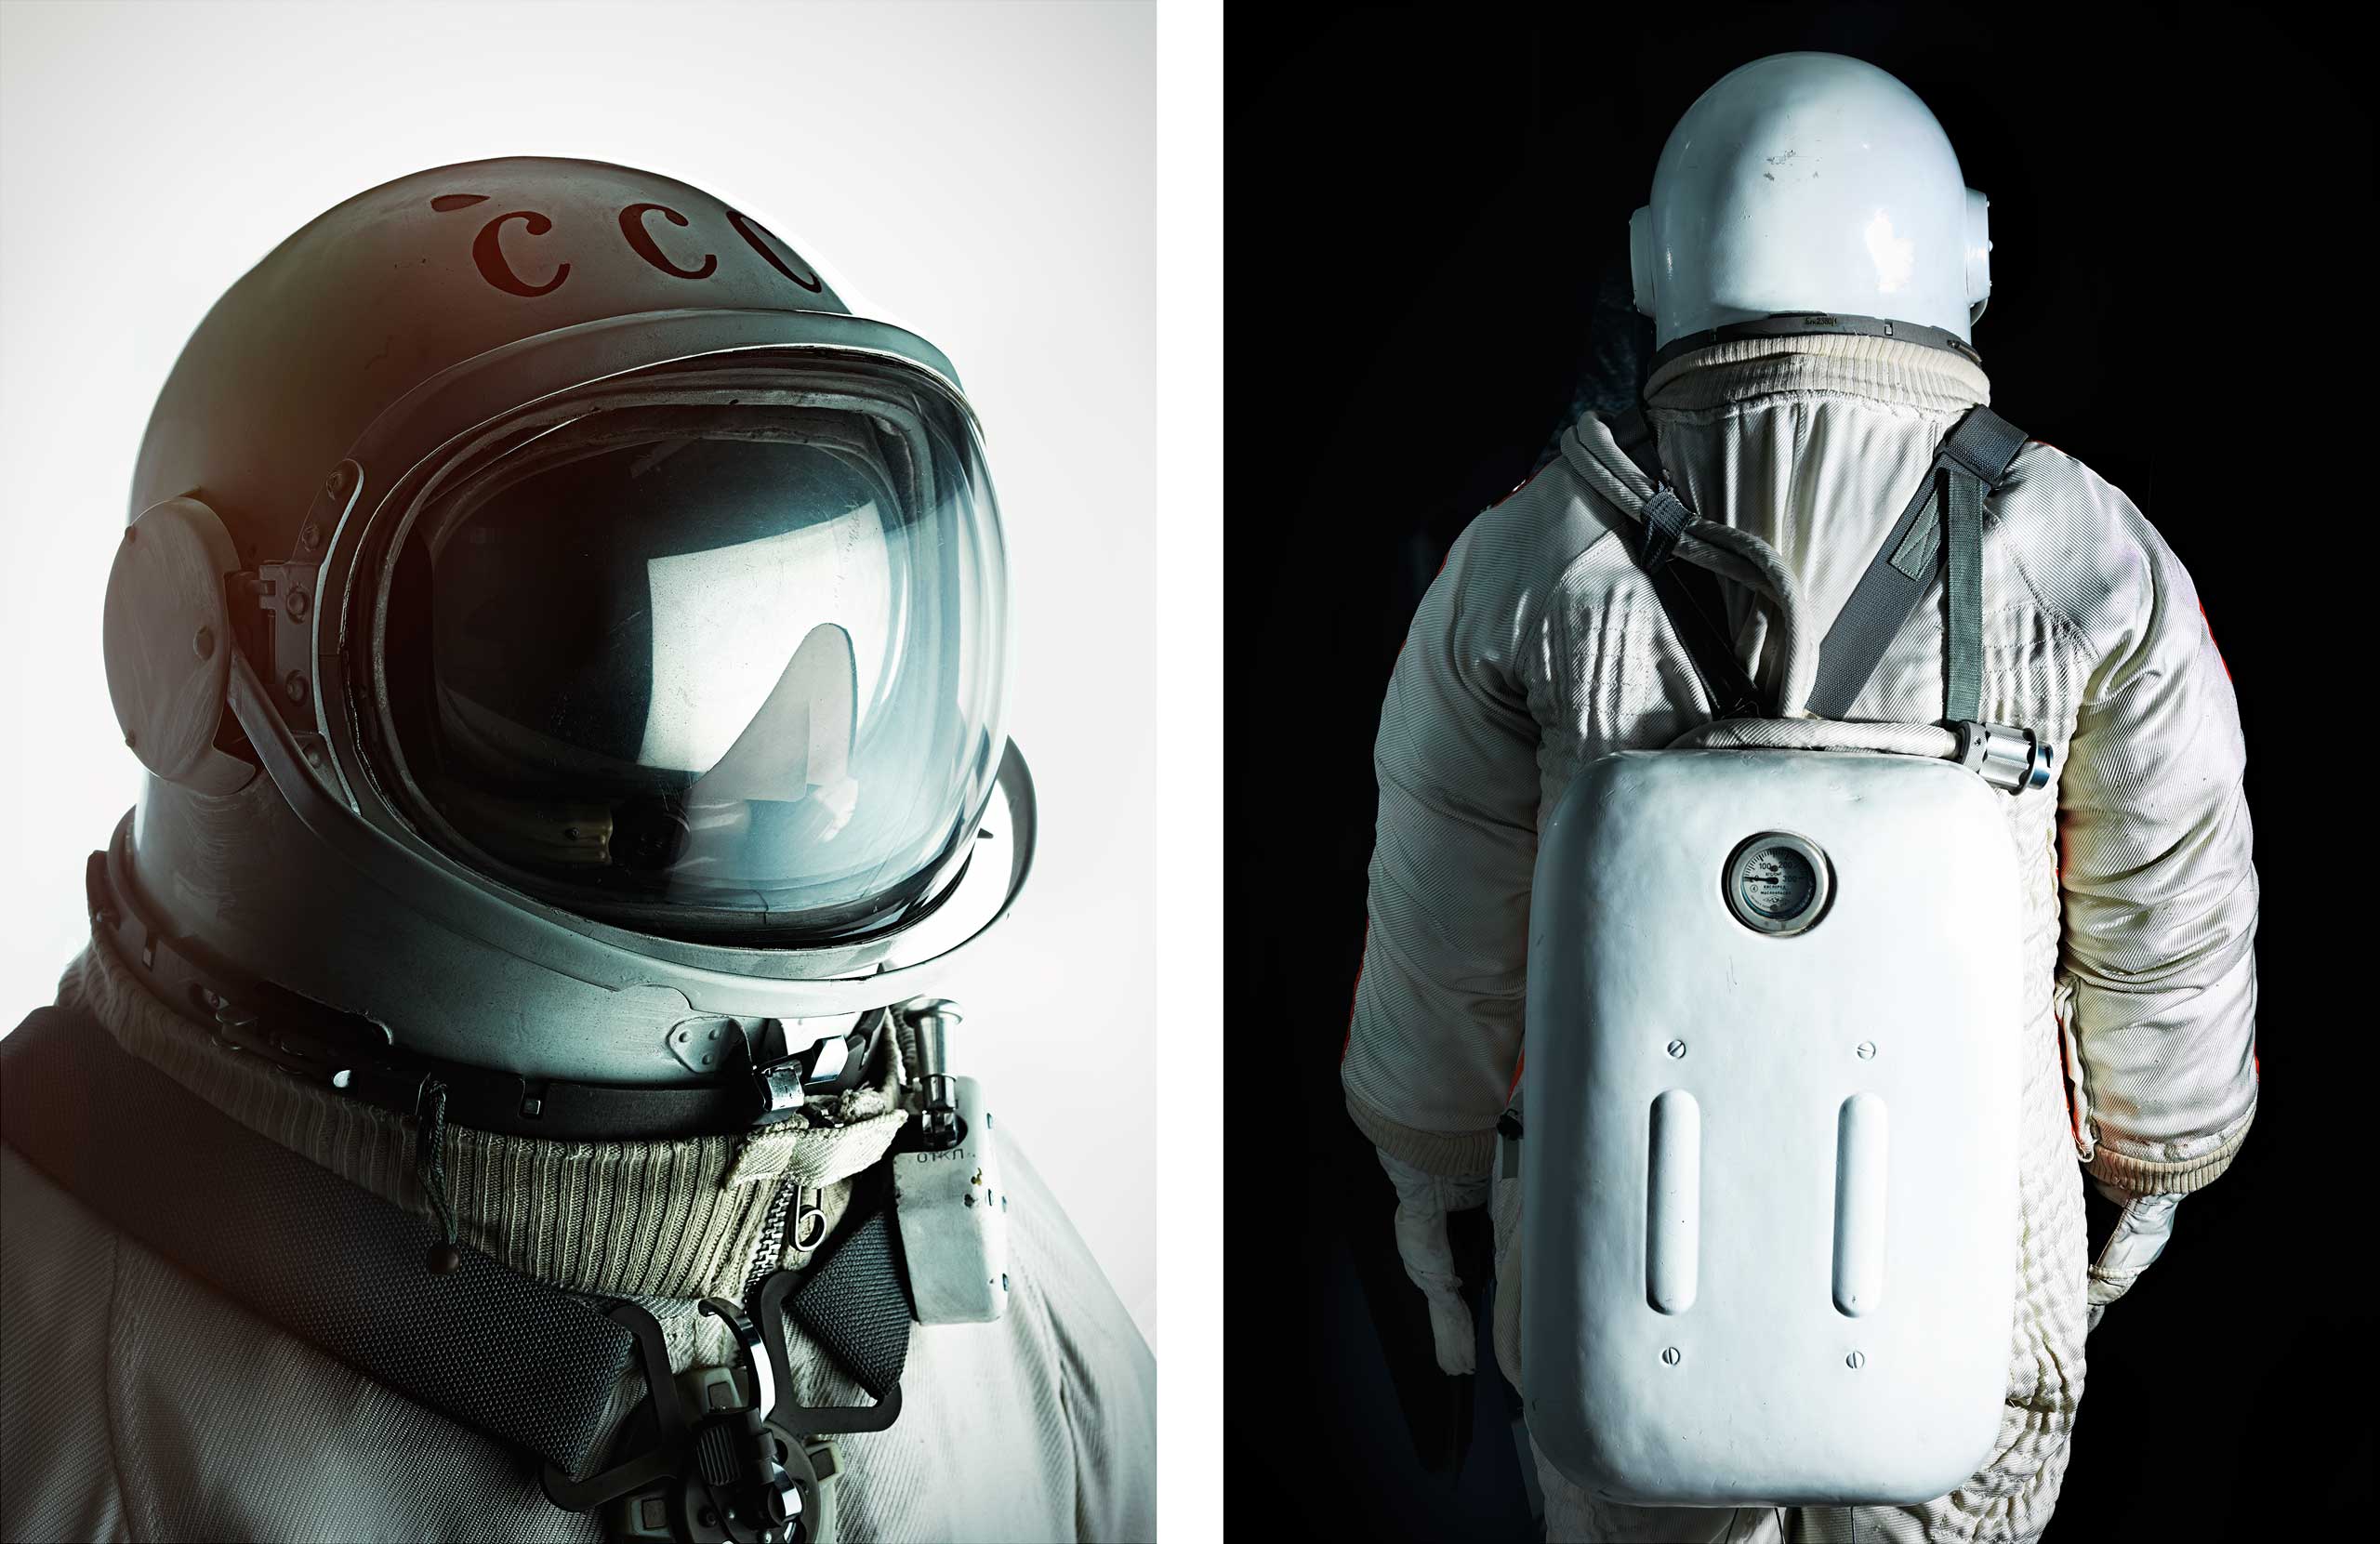 The spacesuit worn by Alexei Leonov on the first-ever spacewalk on March 18, 1965. The suit was photographed at the Memorial Museum of Cosmonautics in Moscow  on March 16, 2015. (Marco Grob for TIME)